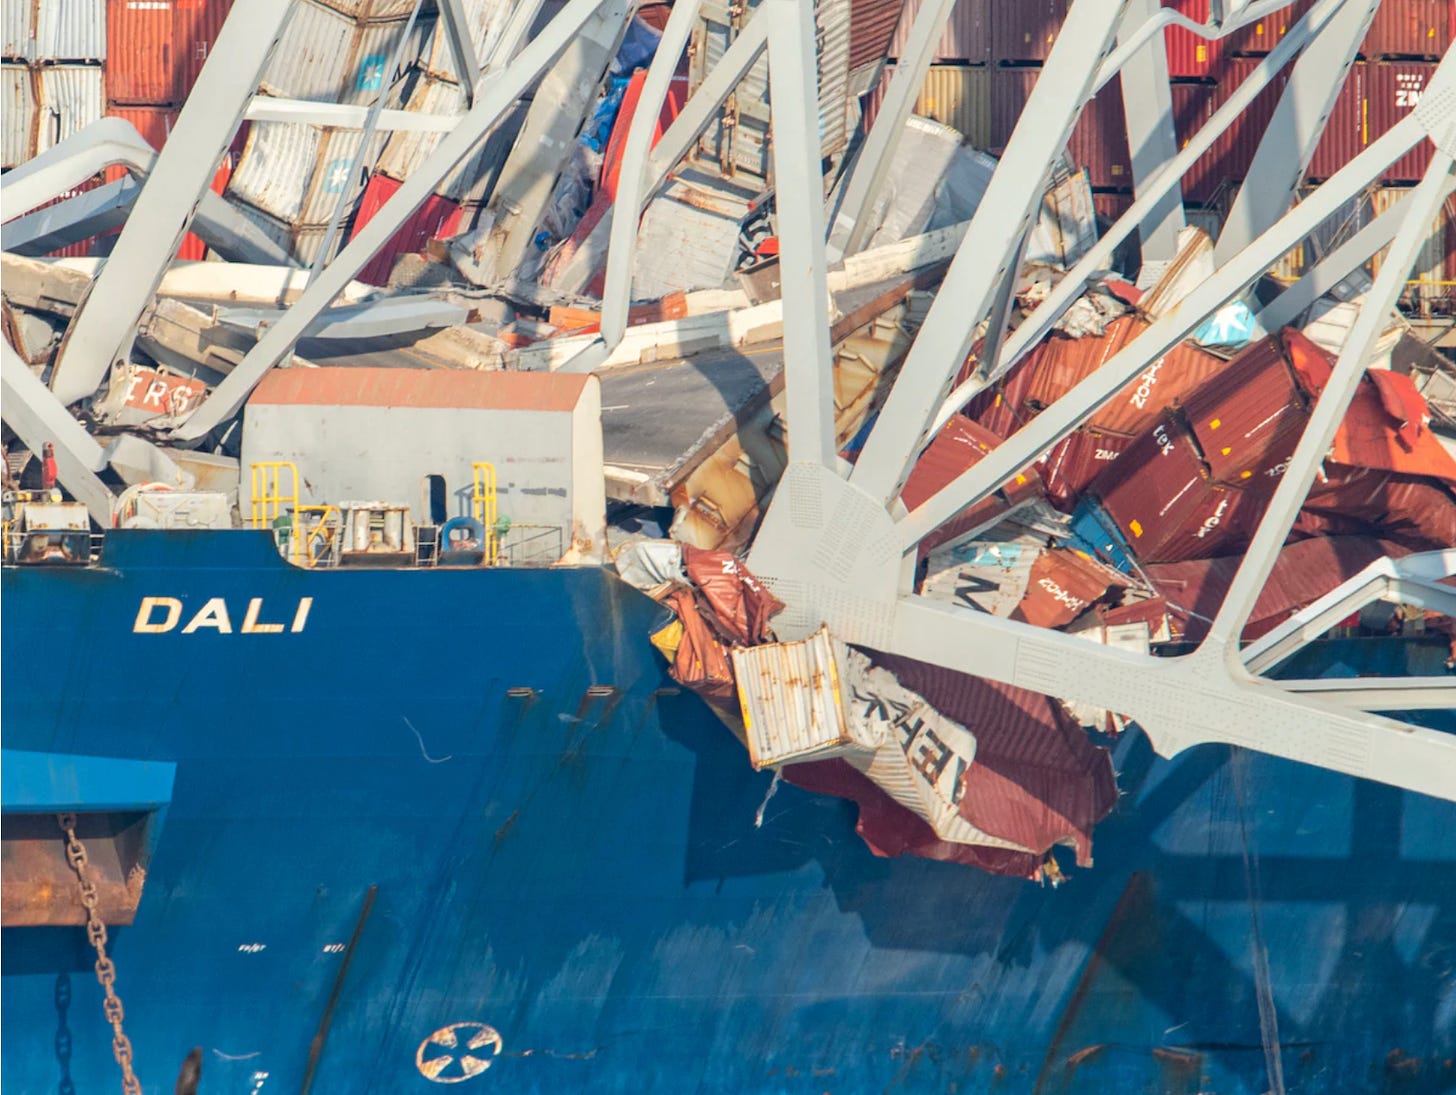 The bow of the container ship Dali, pinned underneath the wreckage of the Francis Scot Key bridge in Baltimore Harbor